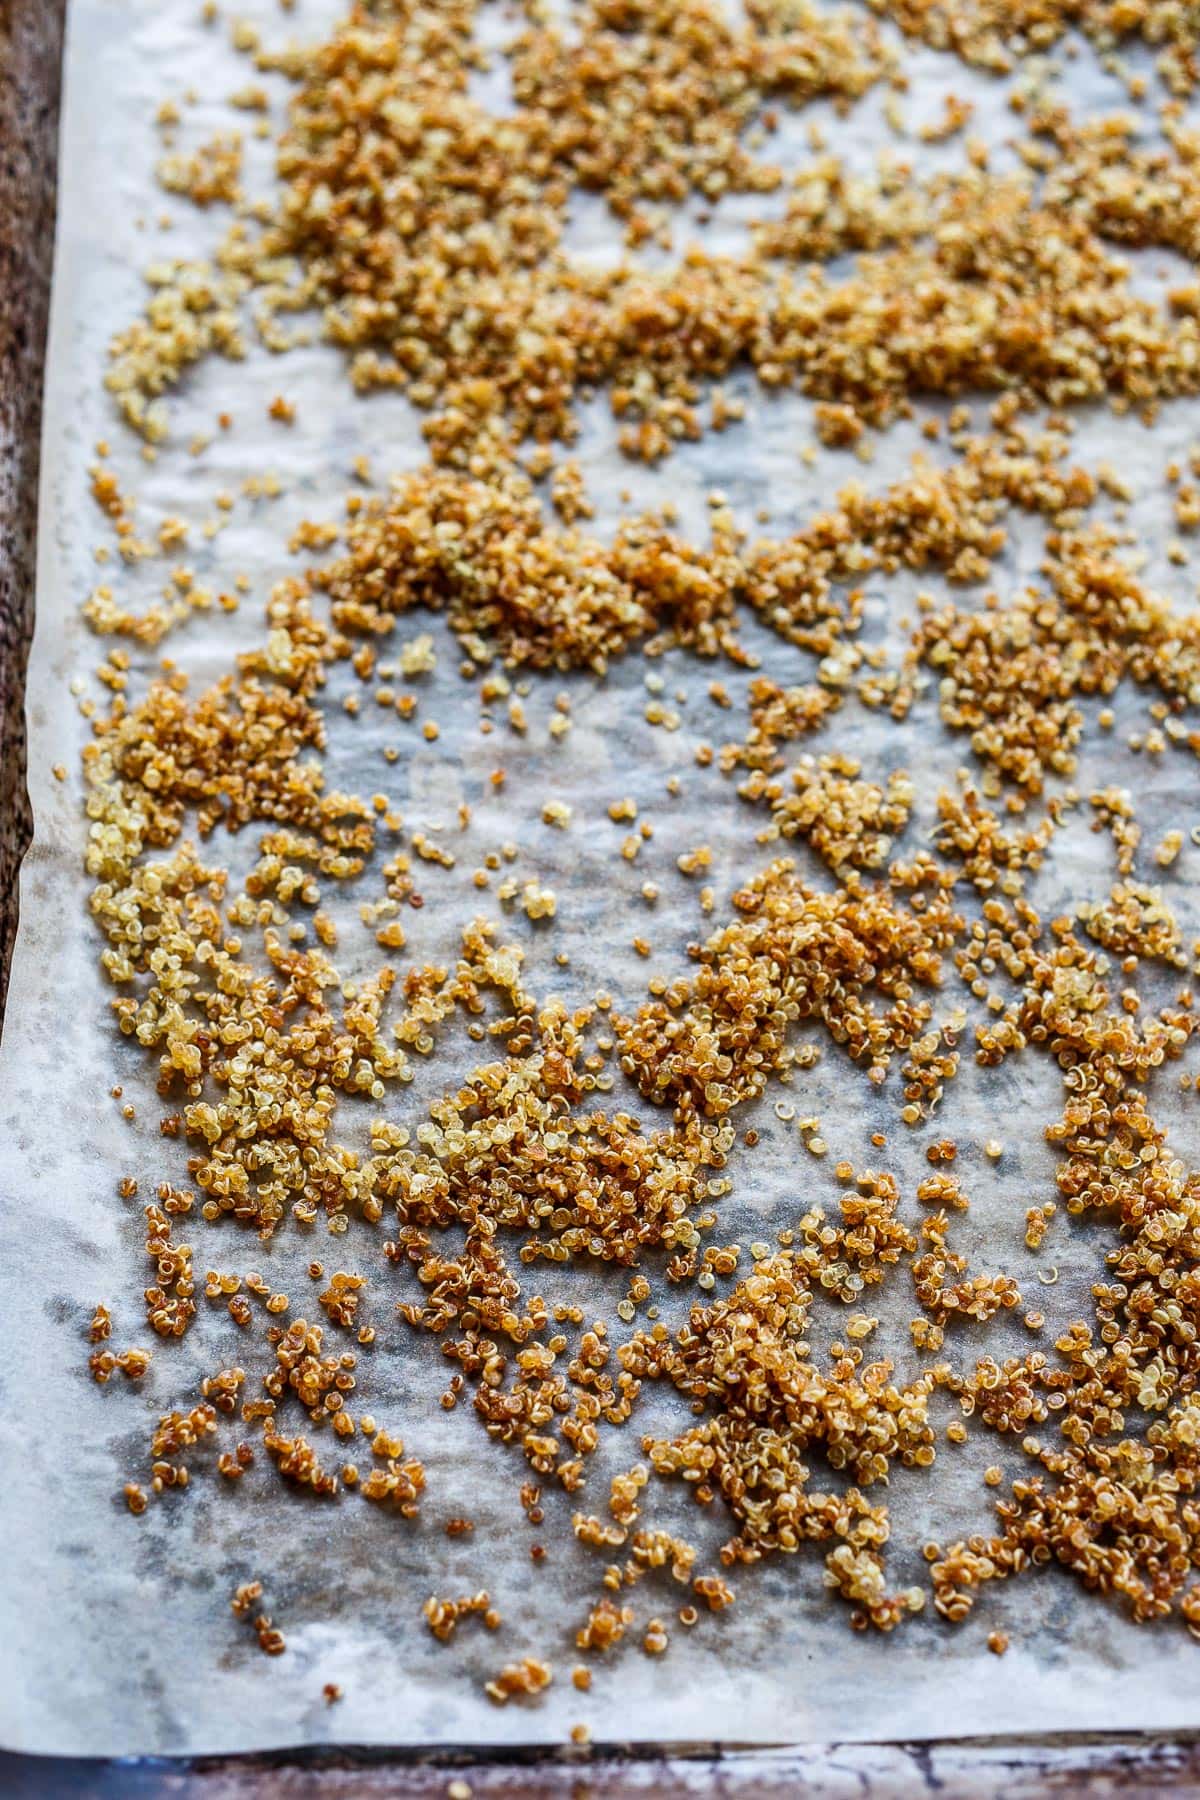 Toasted quinoa on a pan.